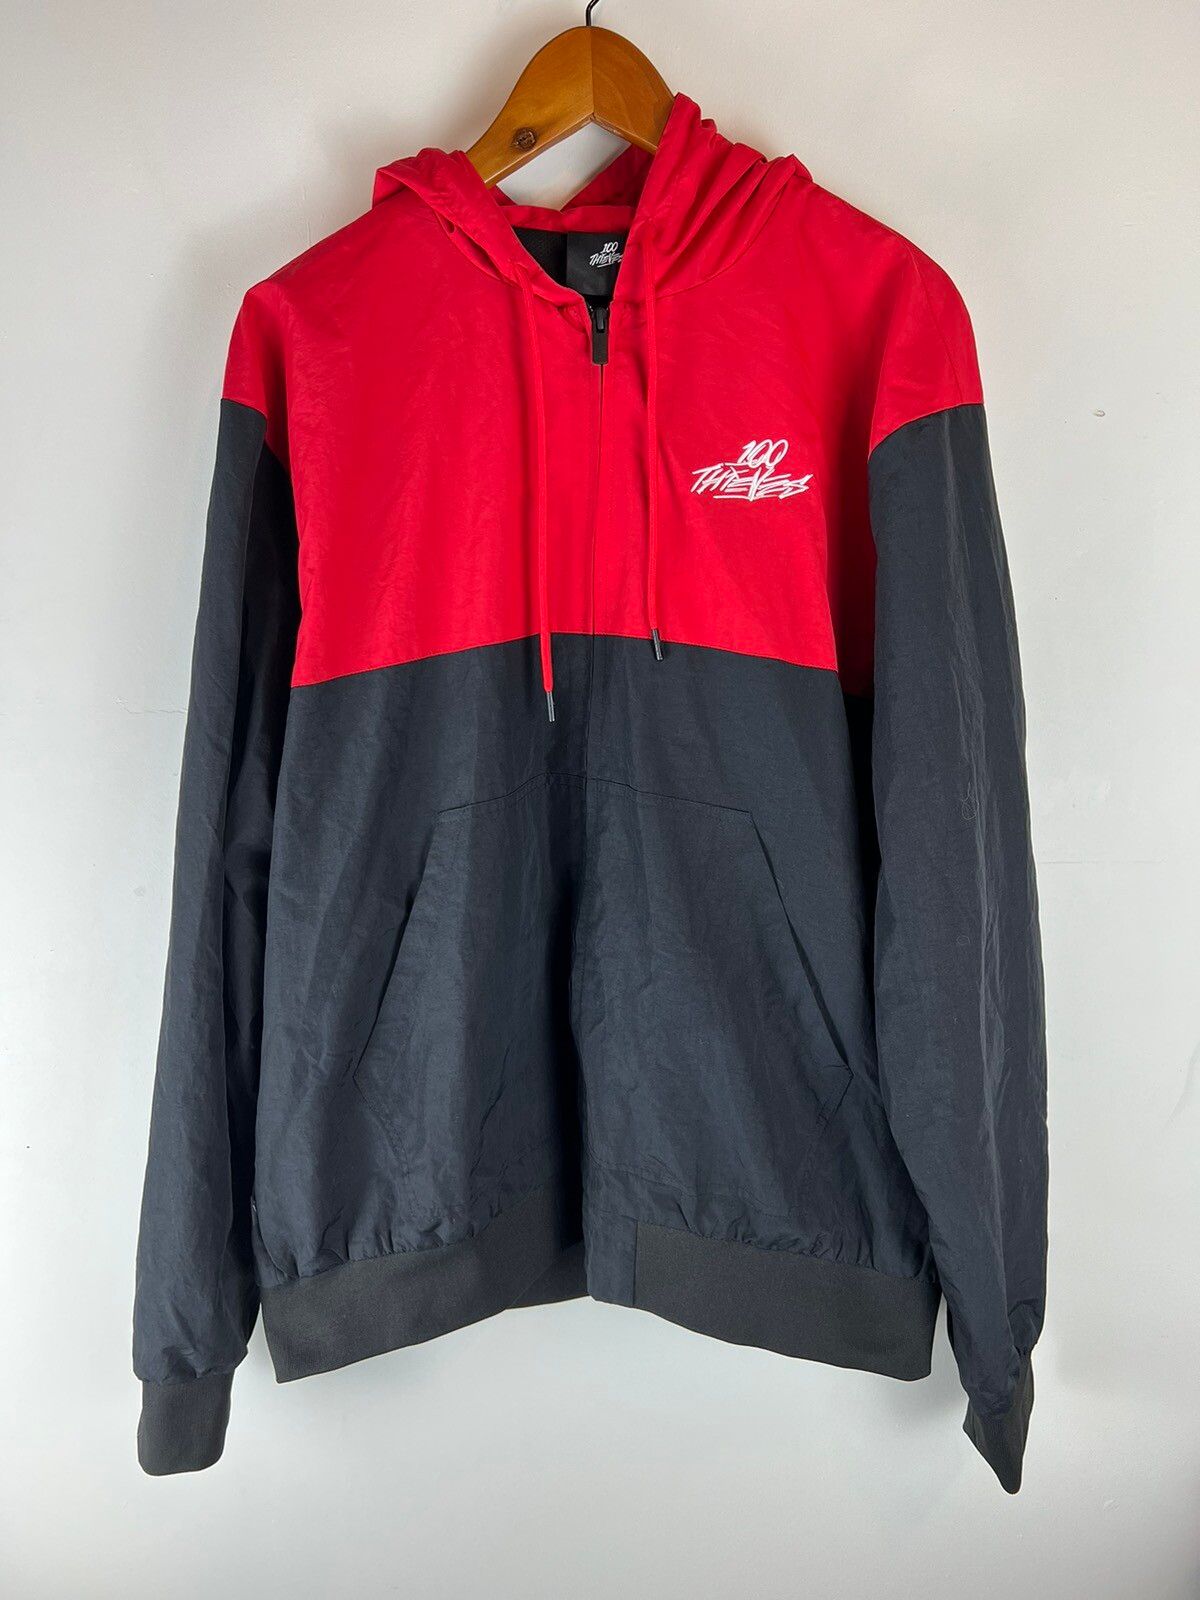 100 Thieves 100 thieves windbreaker jacket Size US L / EU 52-54 / 3 - 1 Preview